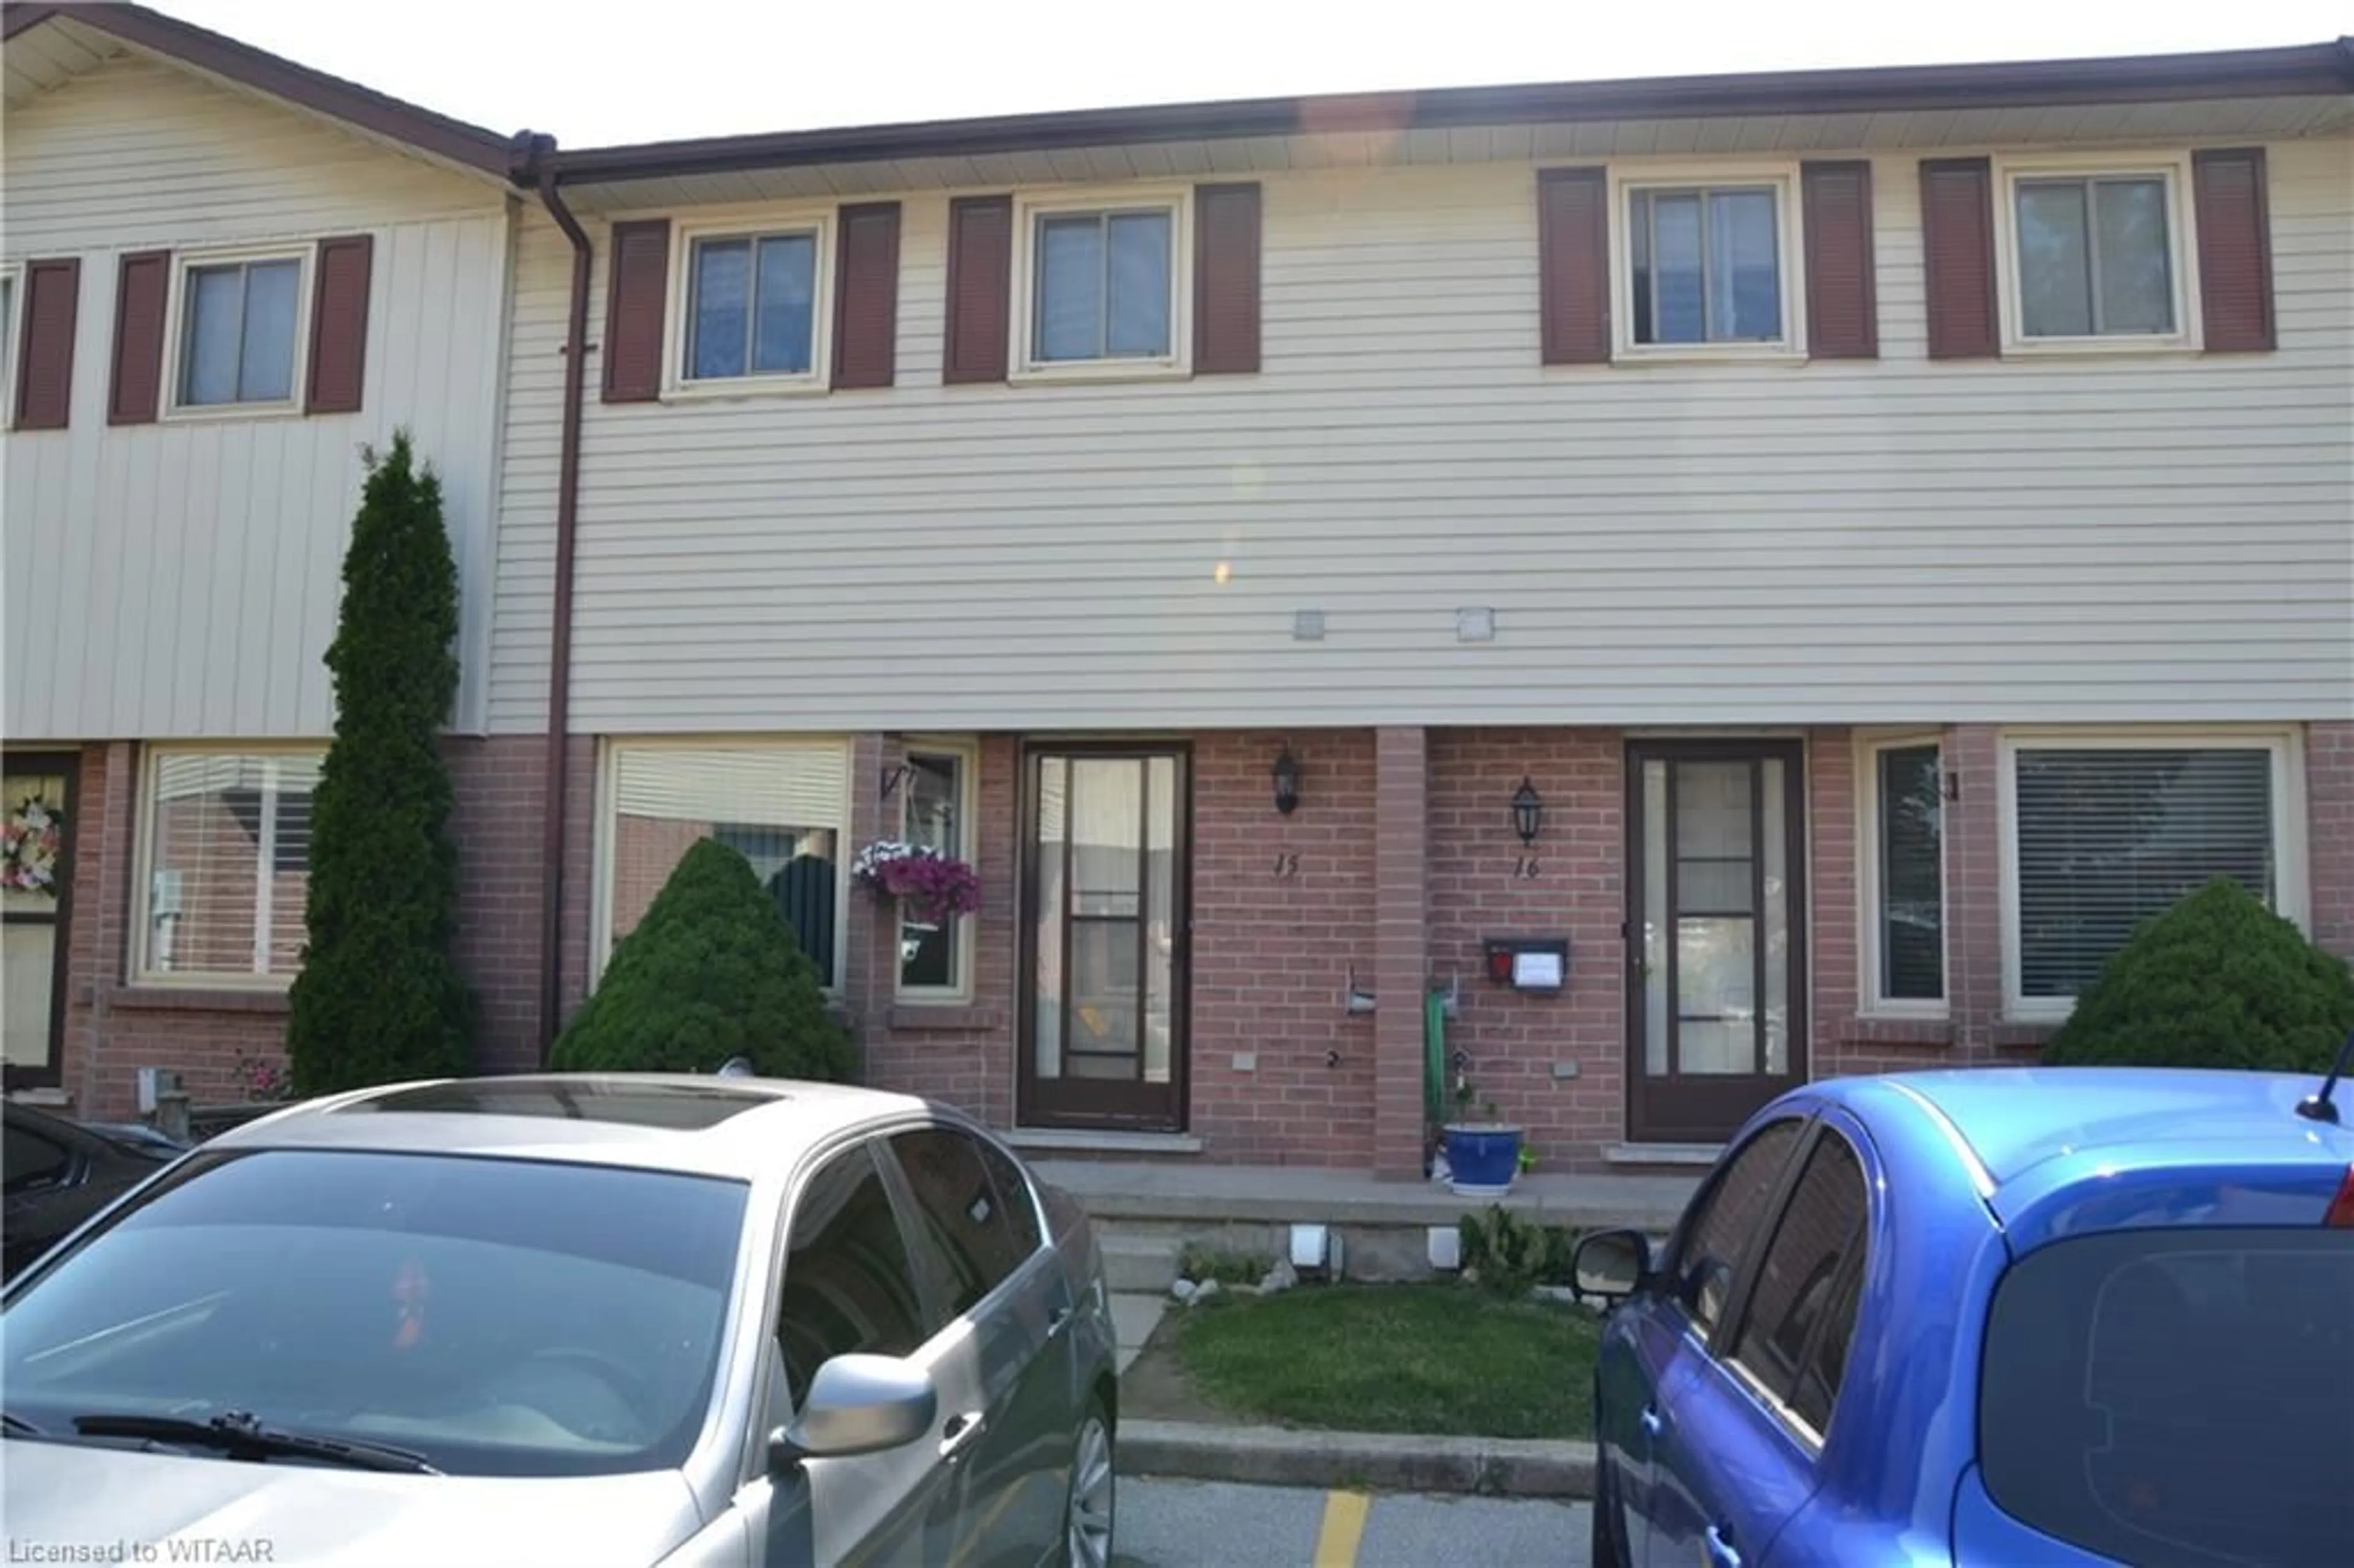 Outside view for 1115 Nellis St #15, Woodstock Ontario N4T 1P6